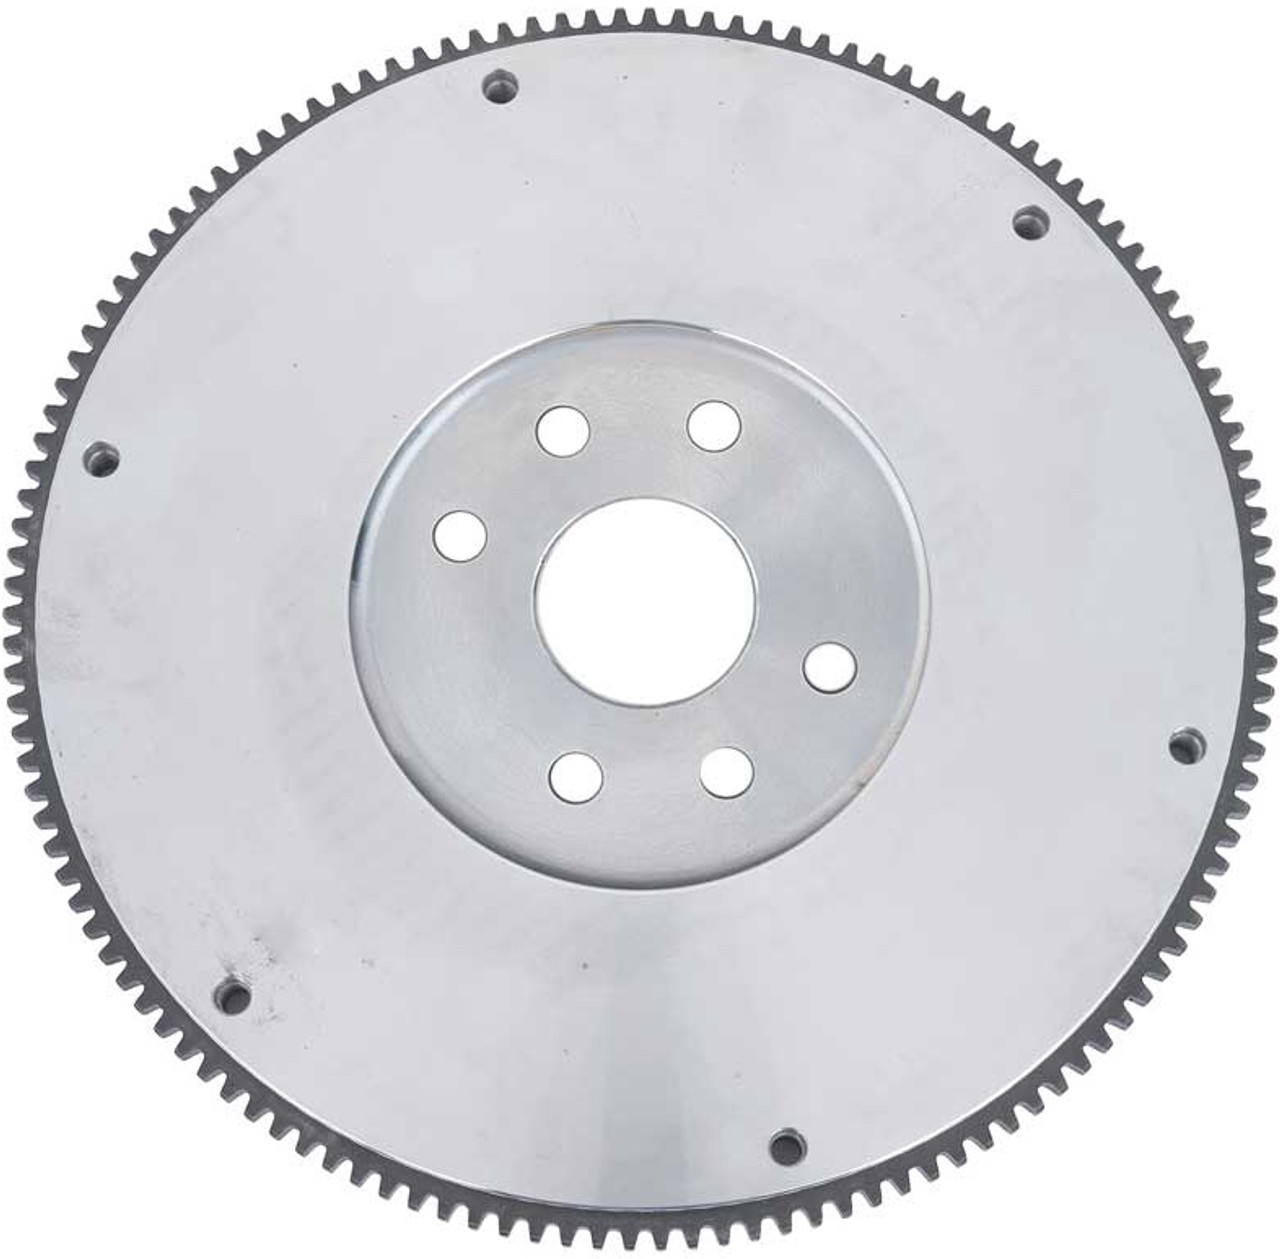 Flywheel for All Dodge and Plymouth "Small Block" Engines, 130 tooth